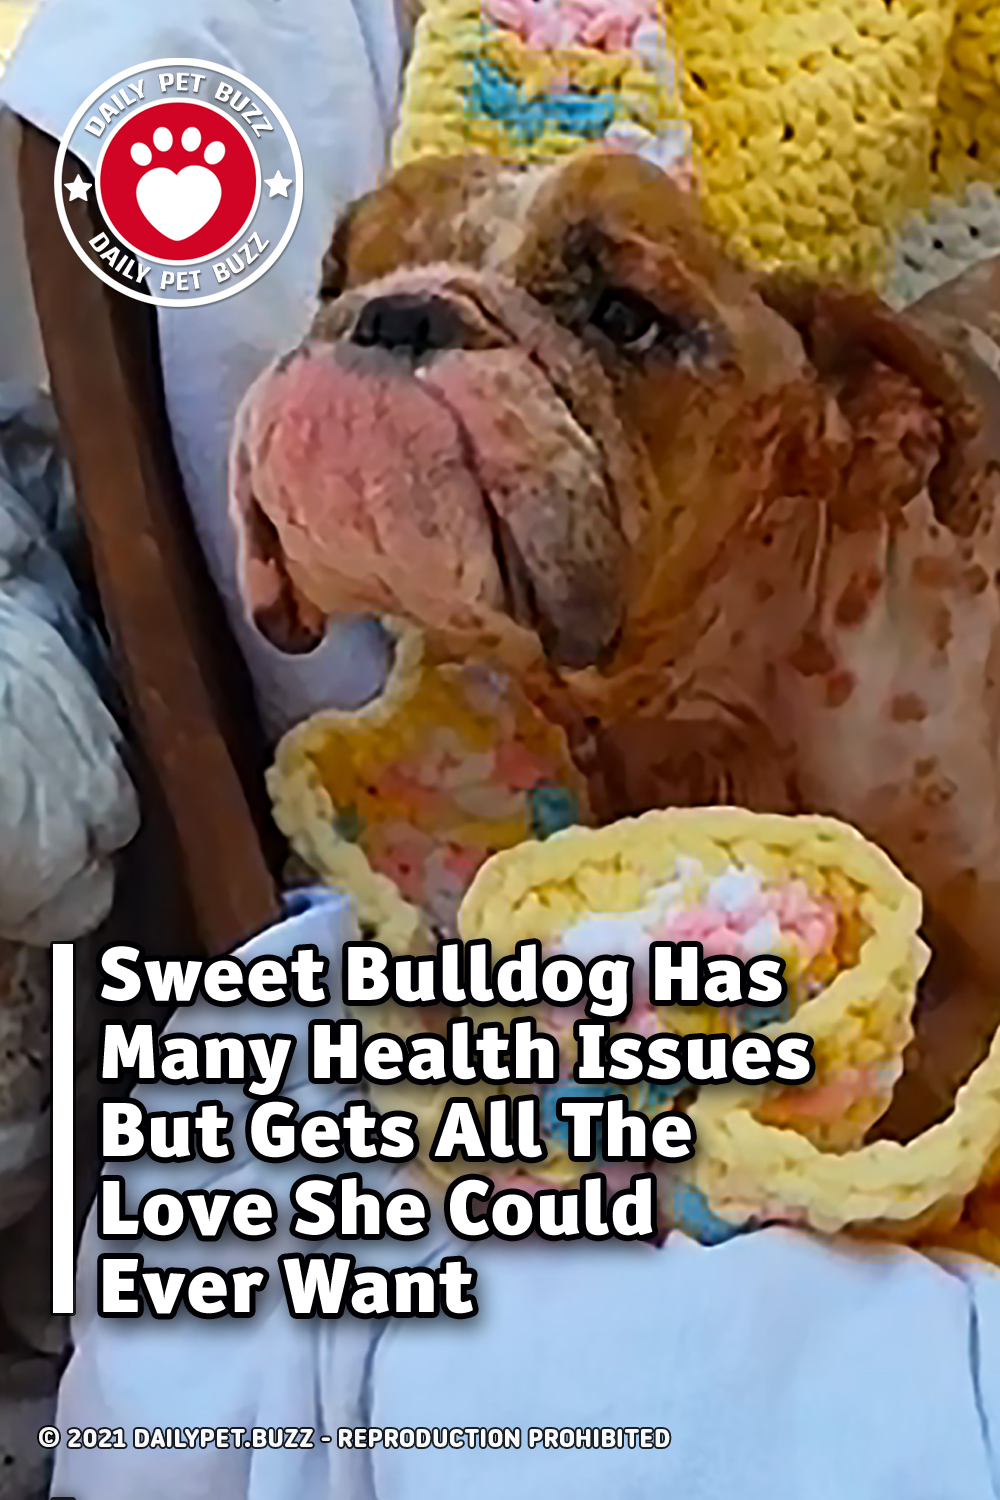 Sweet Bulldog Has Many Health Issues But Gets All The Love She Could Ever Want